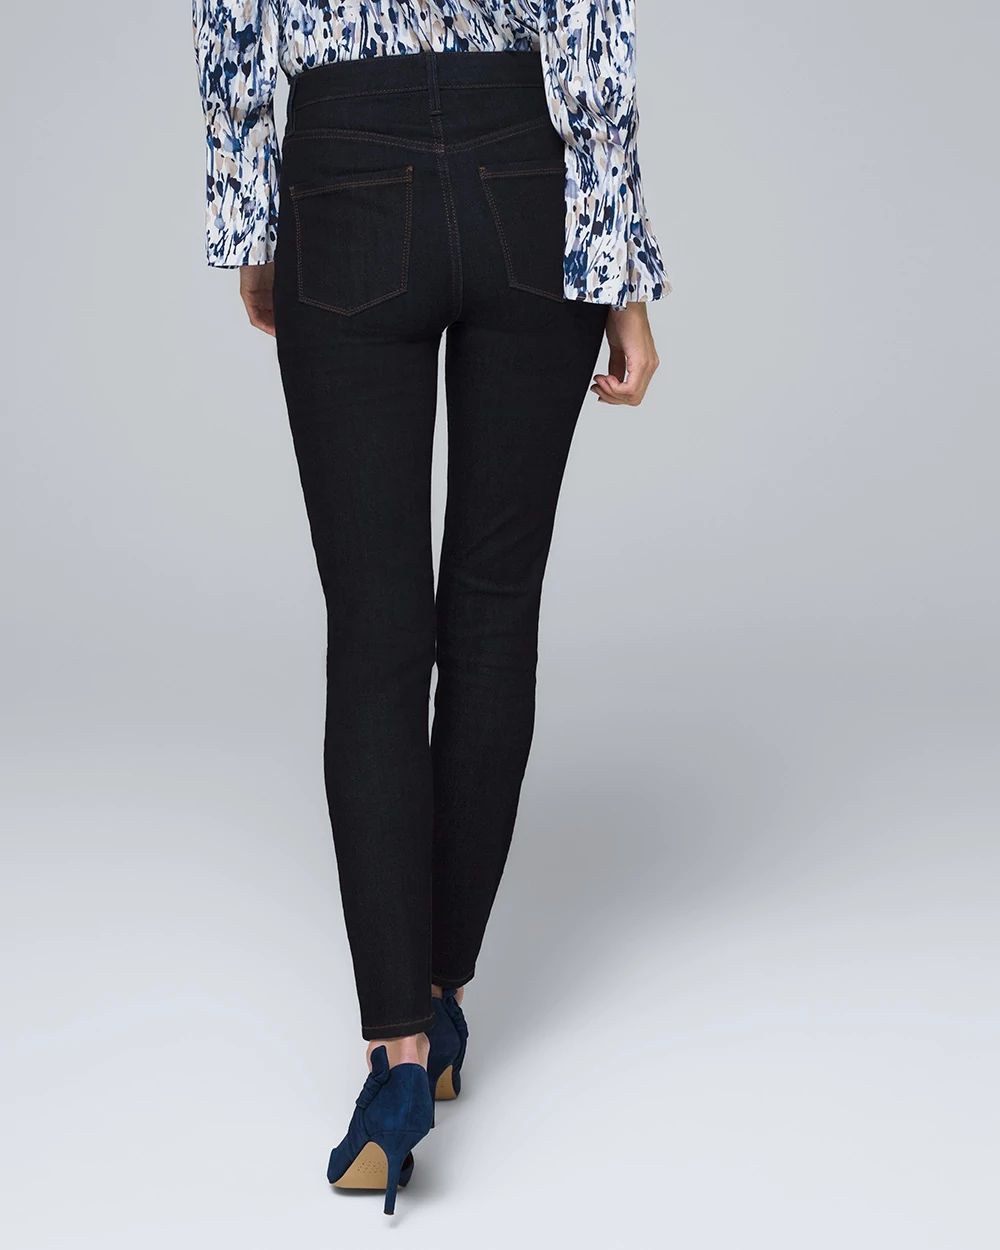 Extra High-Rise Sculpt Skinny Ankle Jeans click to view larger image.